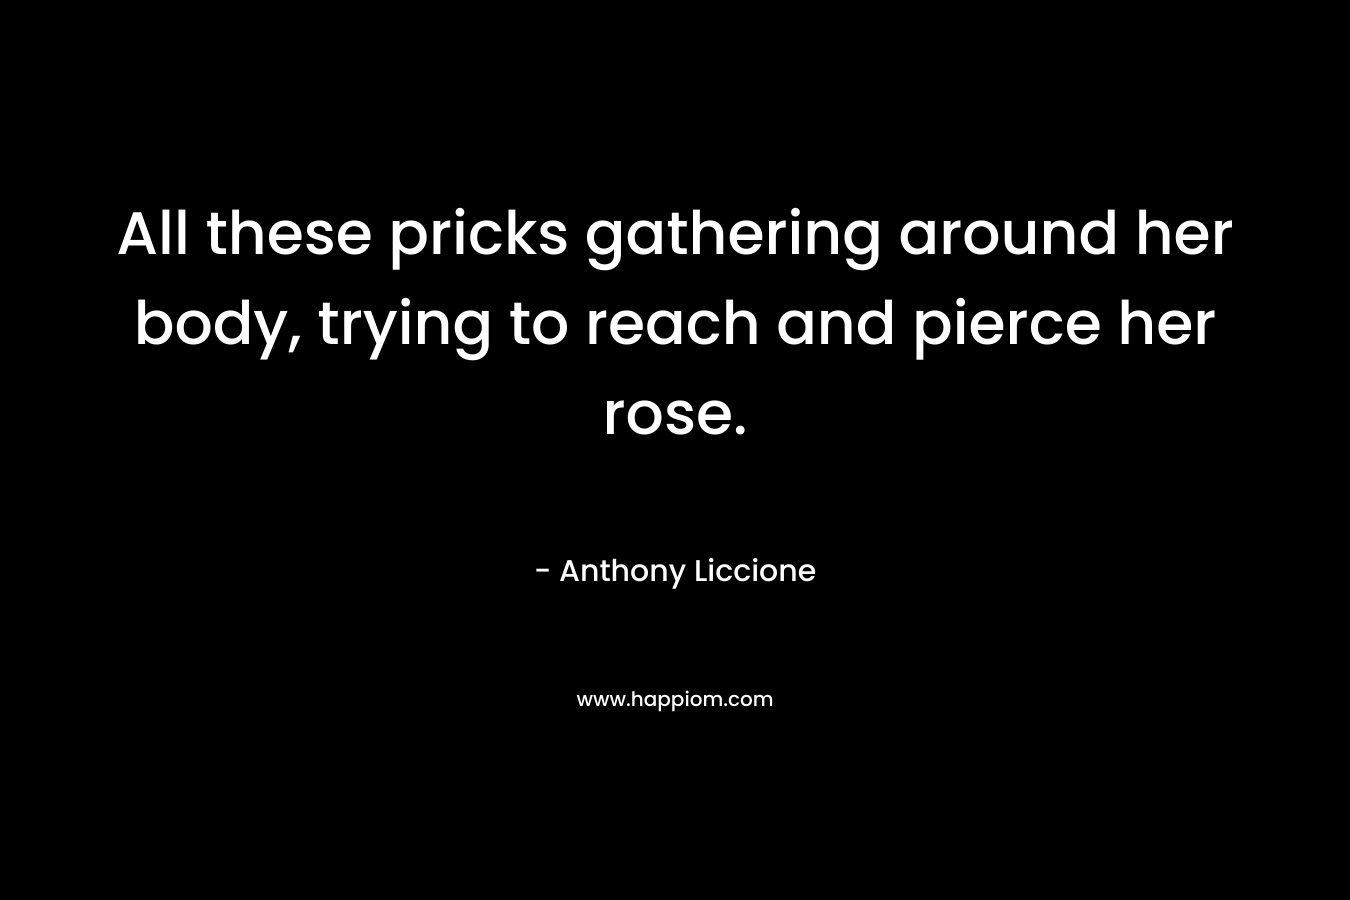 All these pricks gathering around her body, trying to reach and pierce her rose.